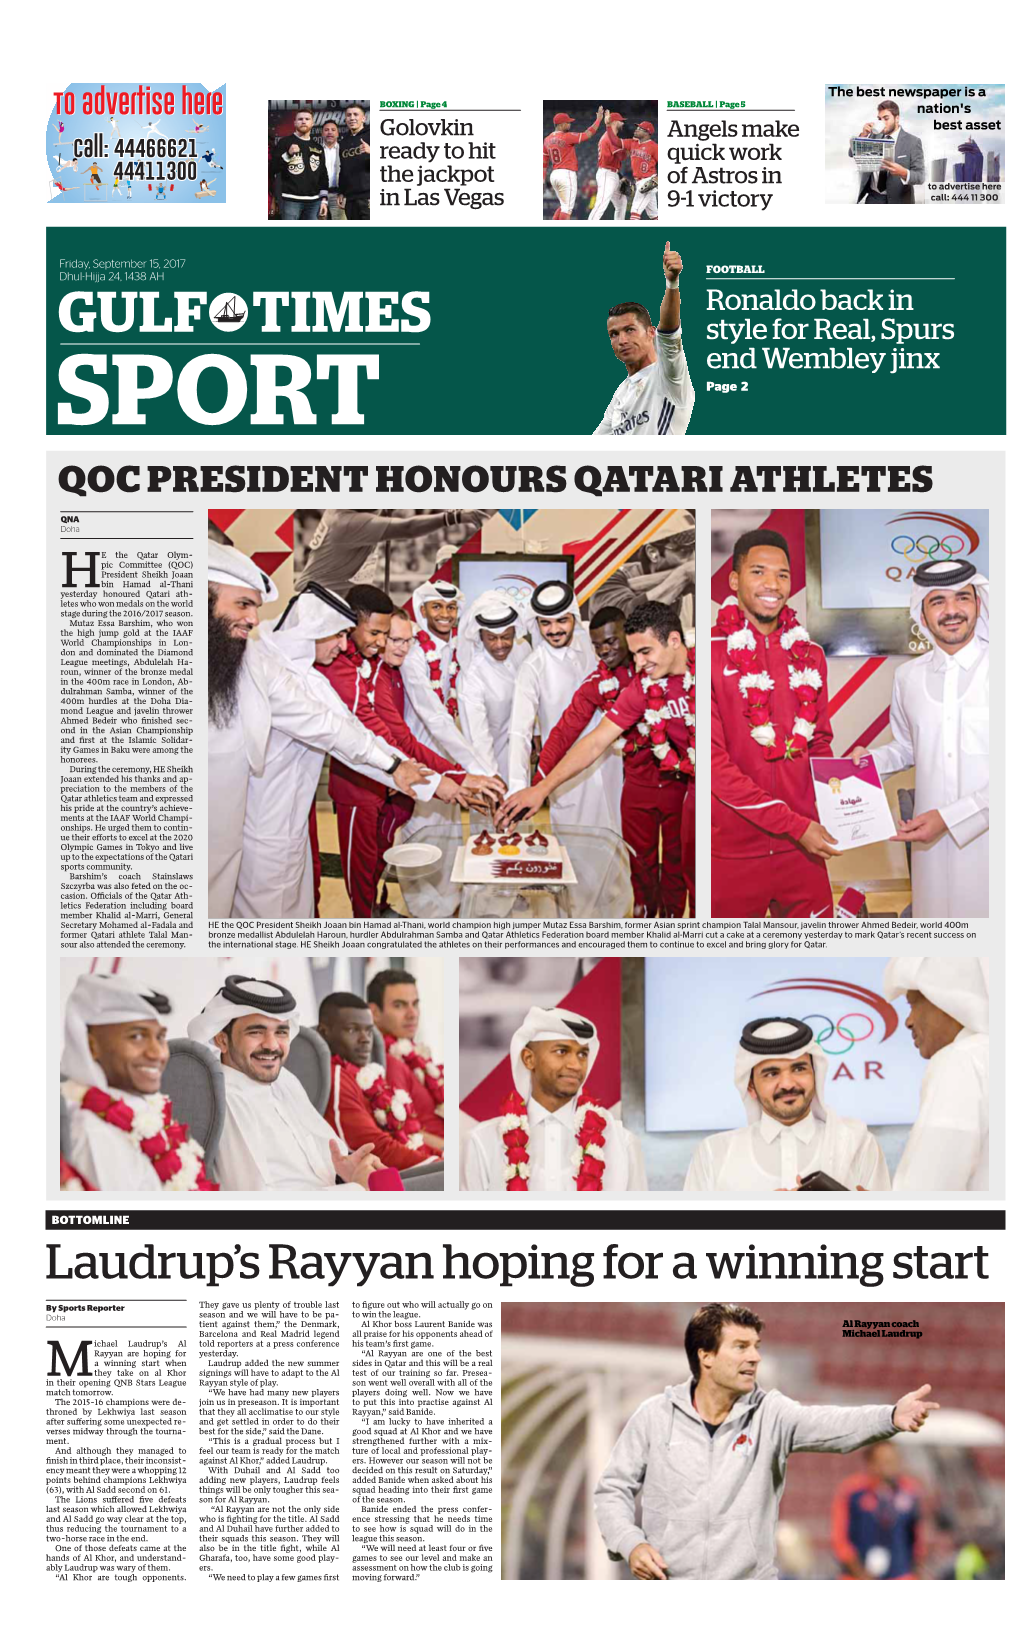 GULF TIMES Style for Real, Spurs End Wembley Jinx SPORT Page 2 QOC PRESIDENT HONOURS QATARI ATHLETES